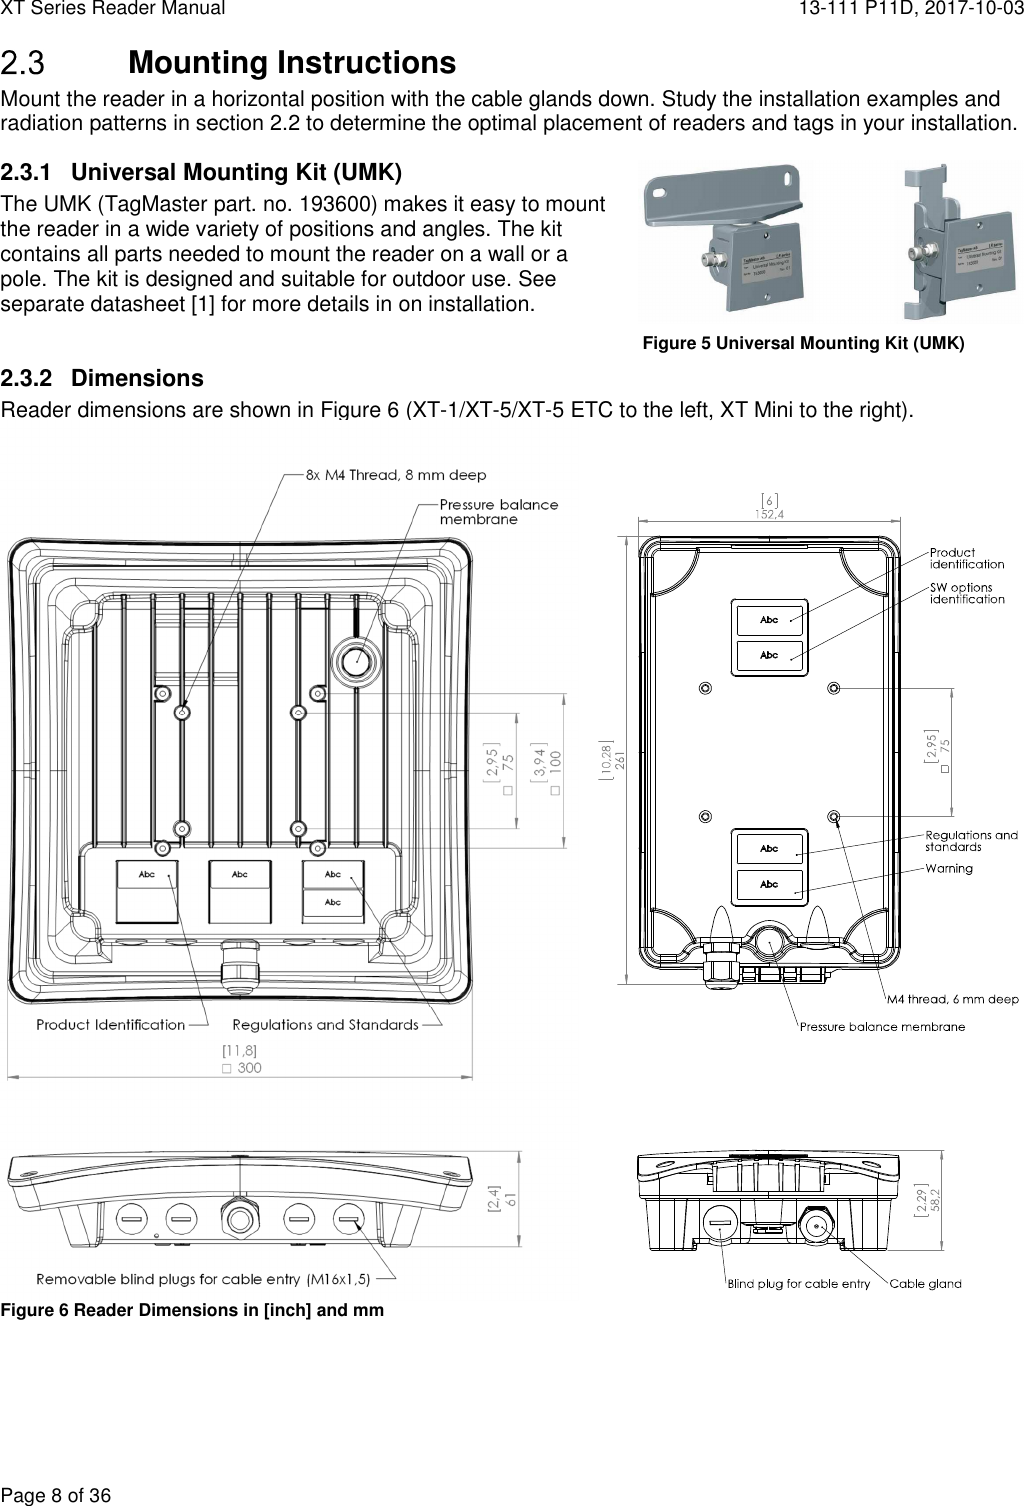 XT Series Reader Manual  13-111 P11D, 2017-10-03  Page 8 of 36  Mounting Instructions Mount the reader in a horizontal position with the cable glands down. Study the installation examples and radiation patterns in section 2.2 to determine the optimal placement of readers and tags in your installation. 2.3.1  Universal Mounting Kit (UMK) The UMK (TagMaster part. no. 193600) makes it easy to mount the reader in a wide variety of positions and angles. The kit contains all parts needed to mount the reader on a wall or a pole. The kit is designed and suitable for outdoor use. See separate datasheet [1] for more details in on installation.  2.3.2  Dimensions Reader dimensions are shown in Figure 6 (XT-1/XT-5/XT-5 ETC to the left, XT Mini to the right).   Figure 6 Reader Dimensions in [inch] and mm  Figure 5 Universal Mounting Kit (UMK) 